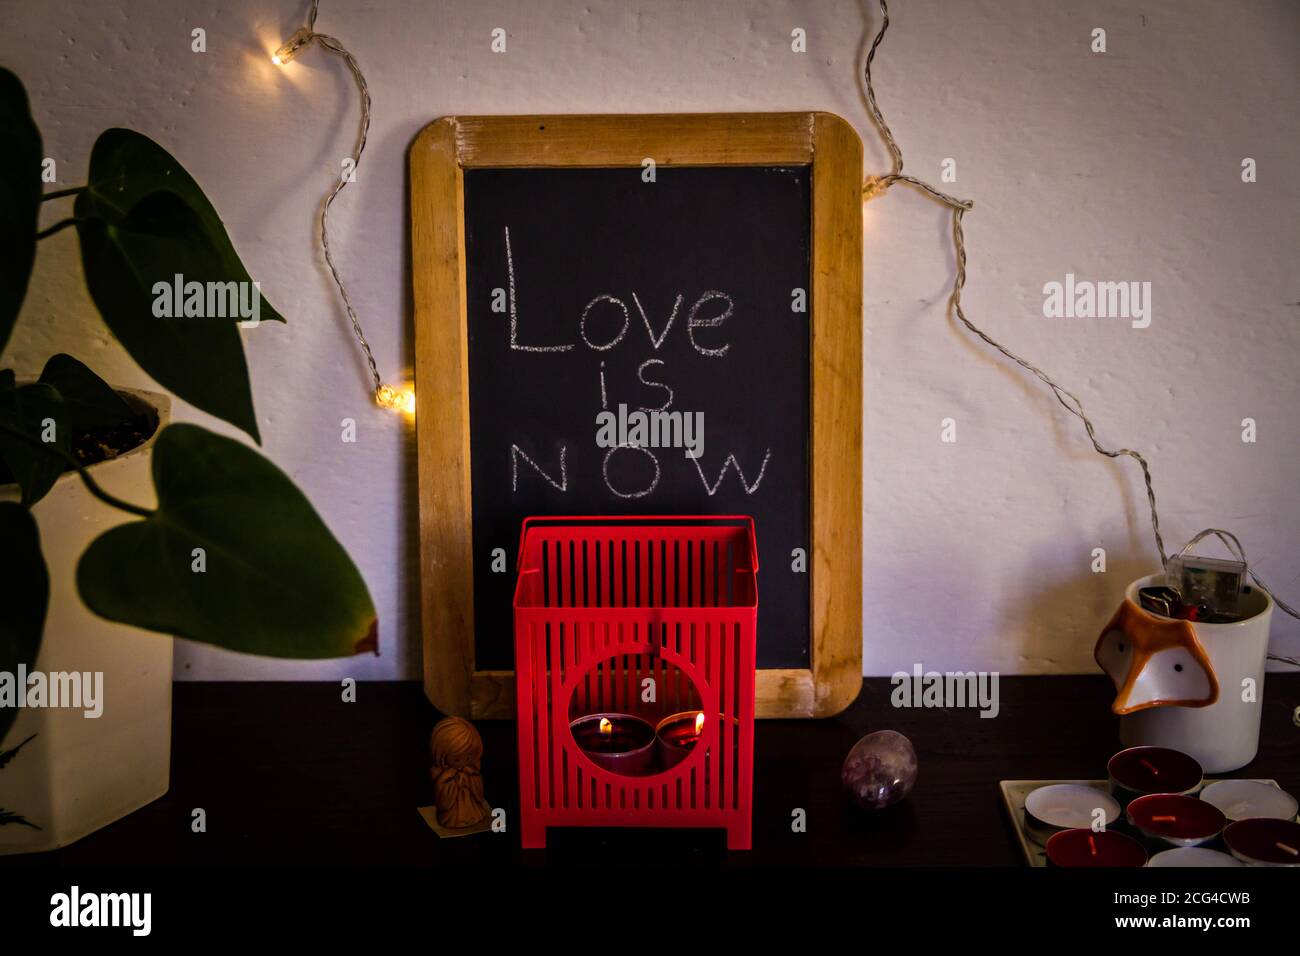 Cozy home design with blackboard written 'Love is now' Stock Photo